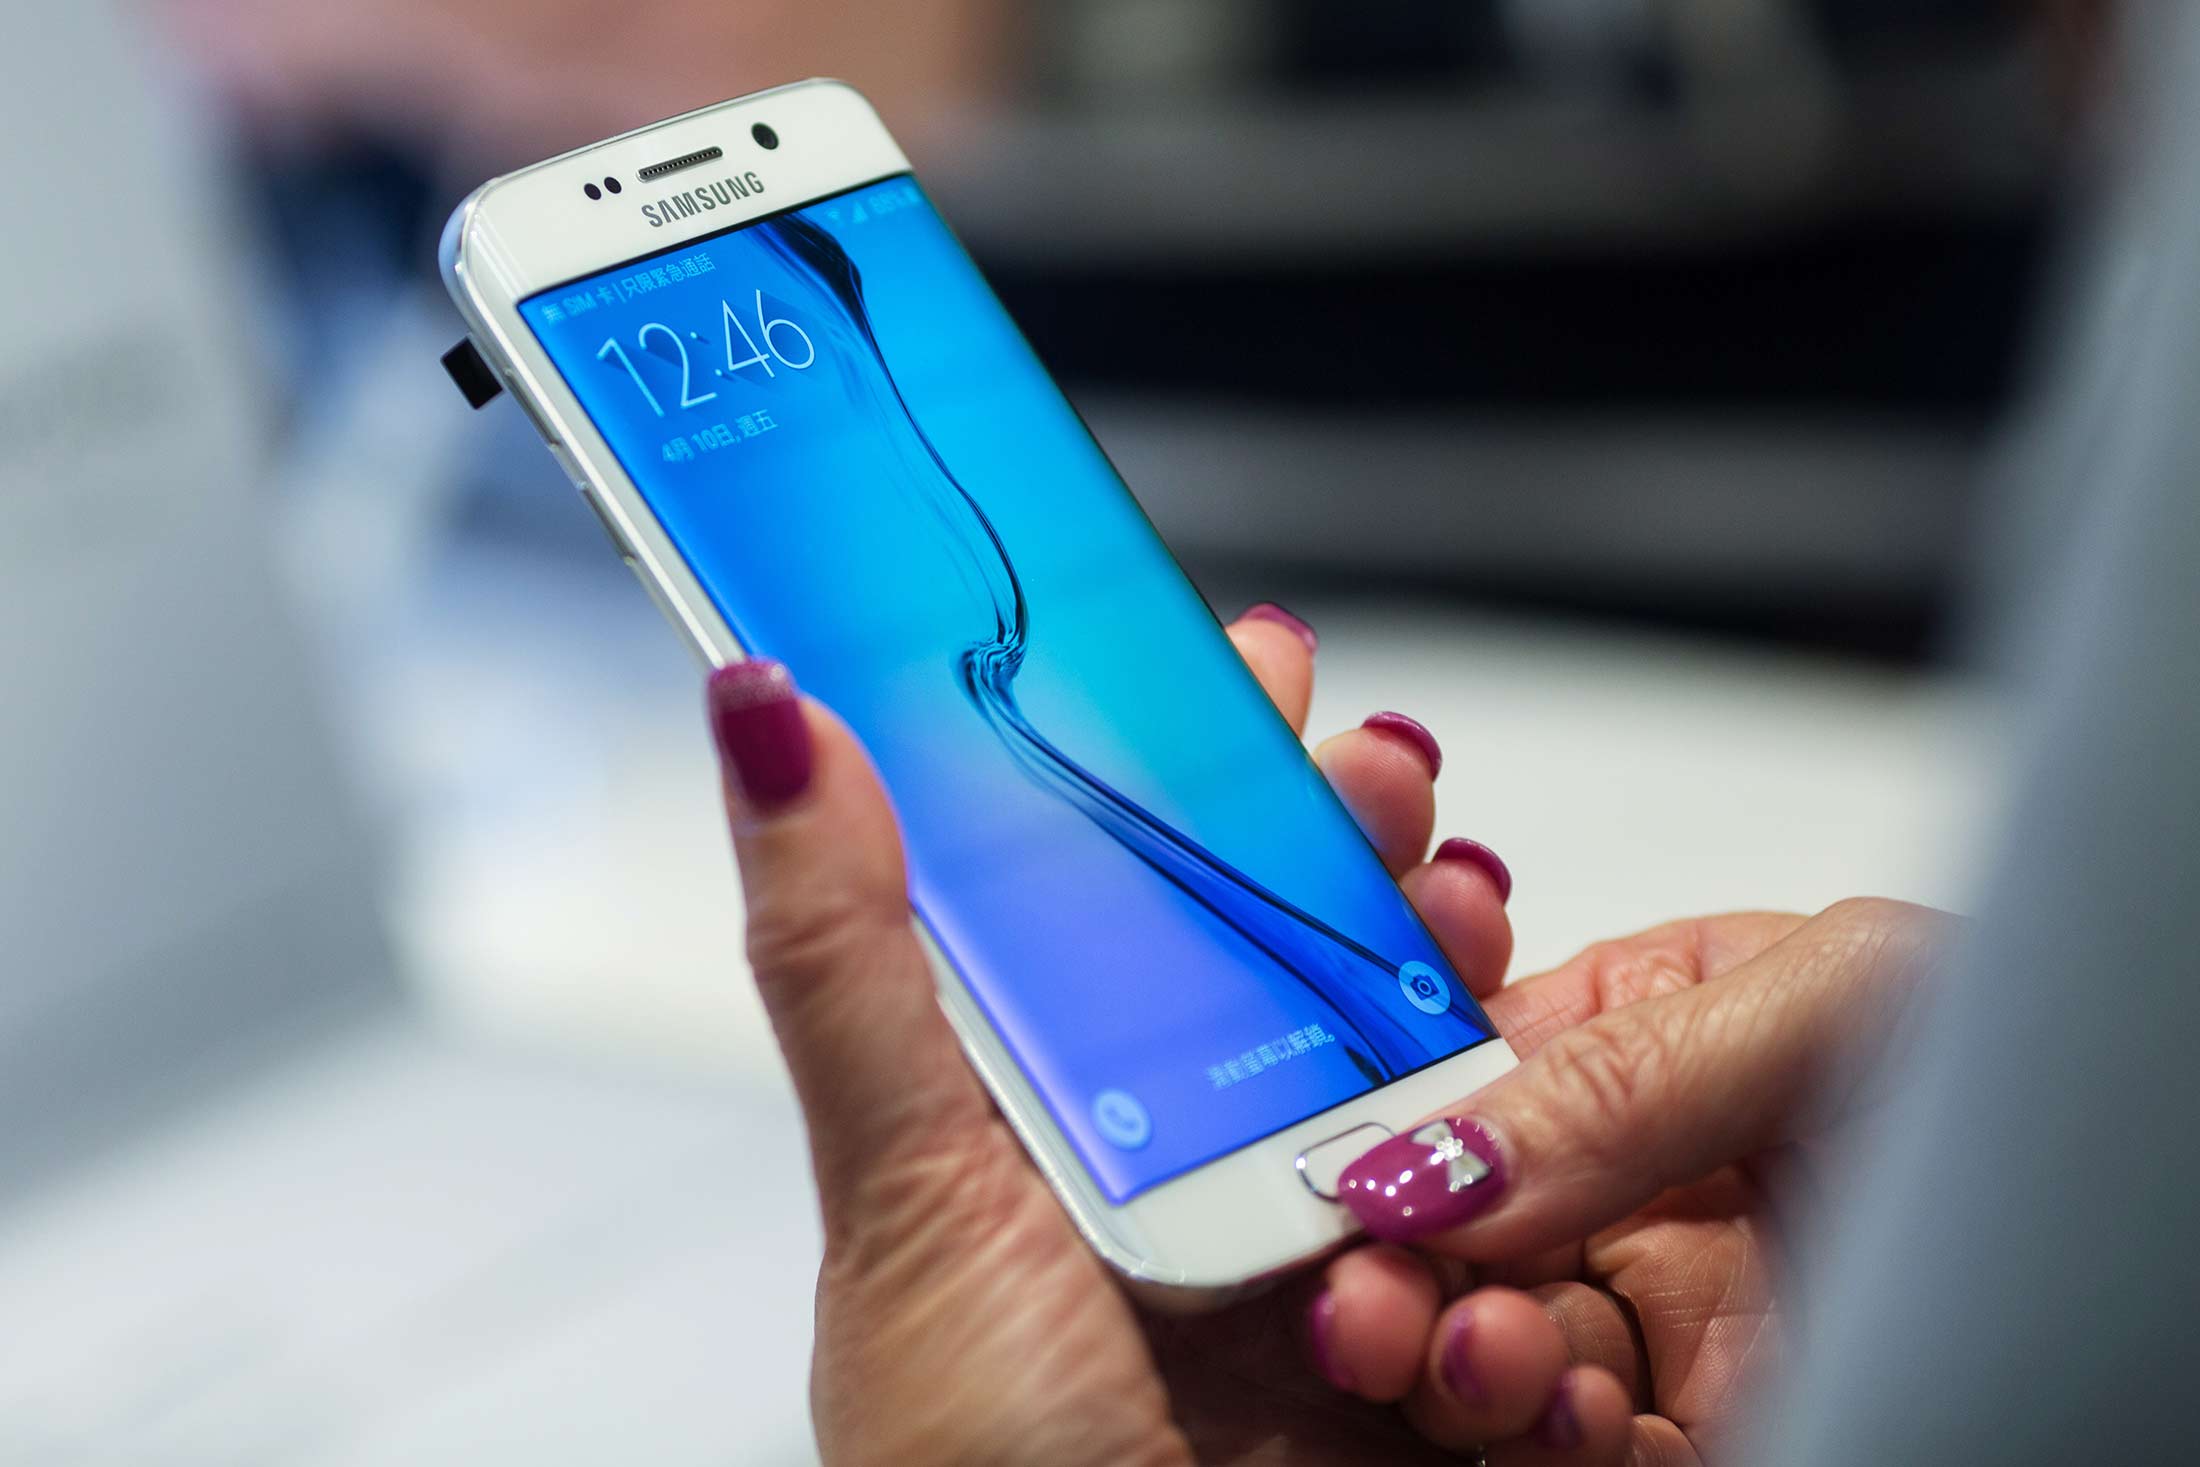 An attendee tries a Samsung Galaxy S6 Edge smartphone at a launch event in Hong Kong on April 10.
